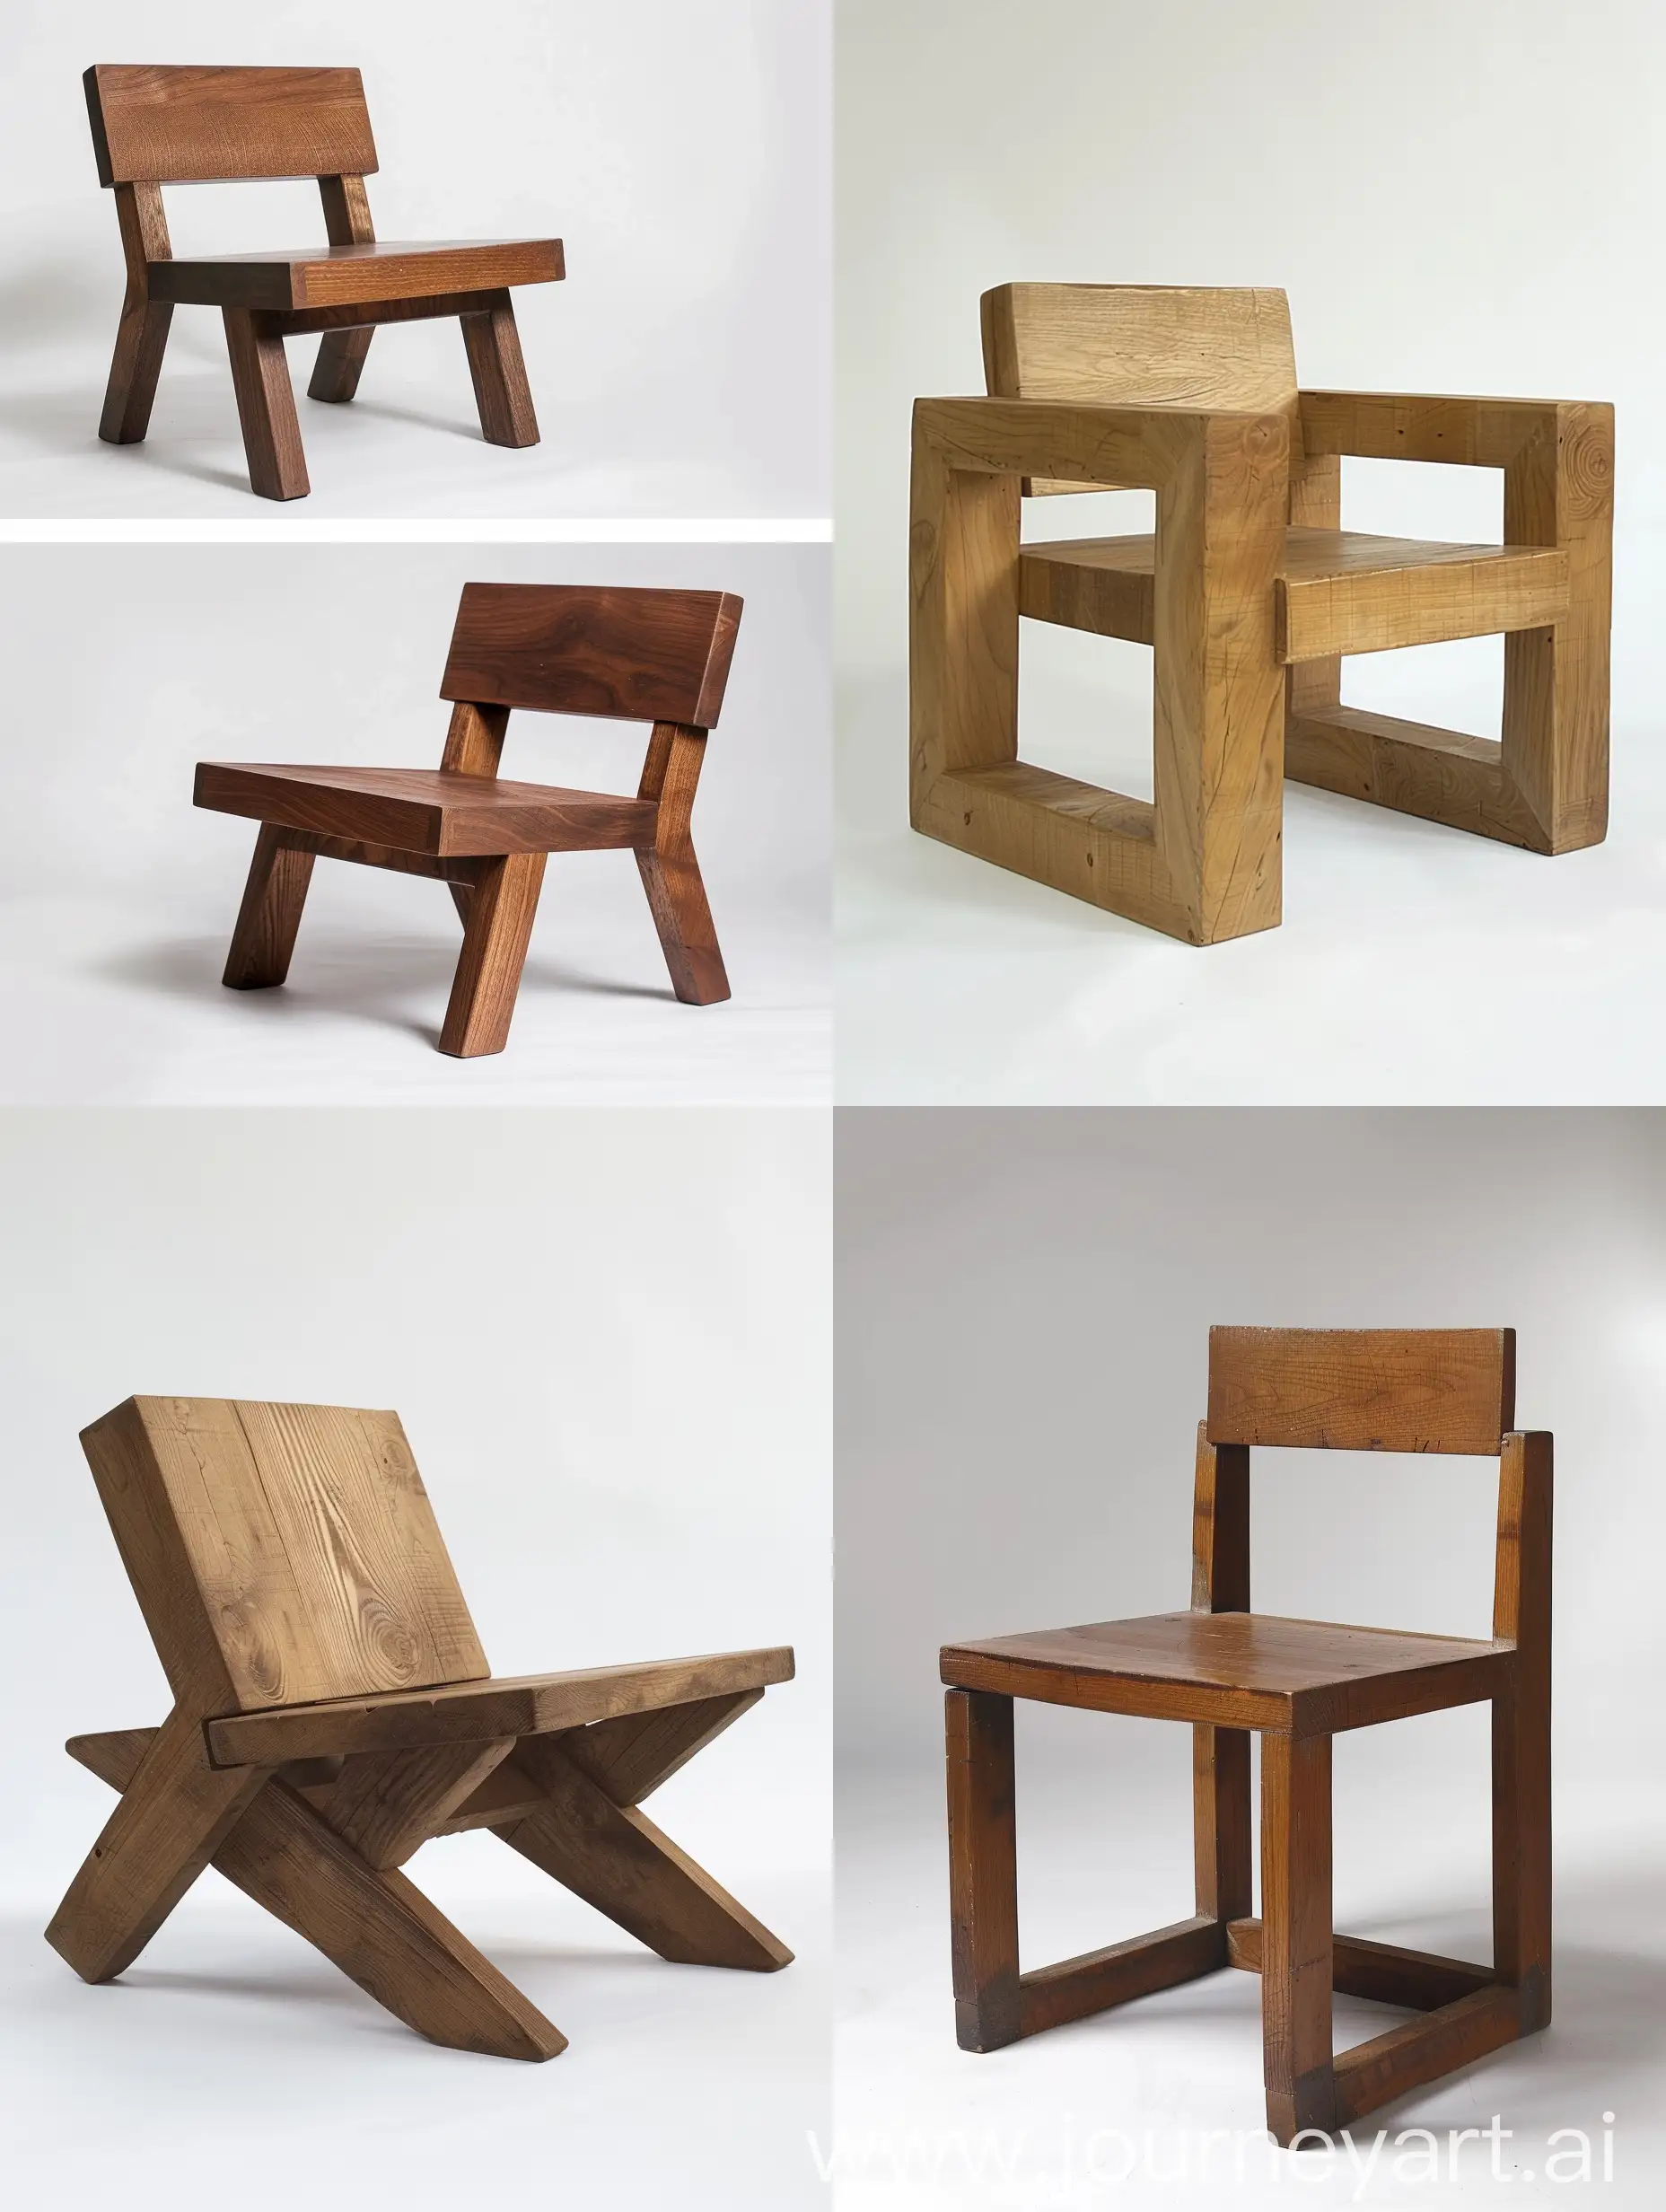 Design a new design for a minimal wooden chair